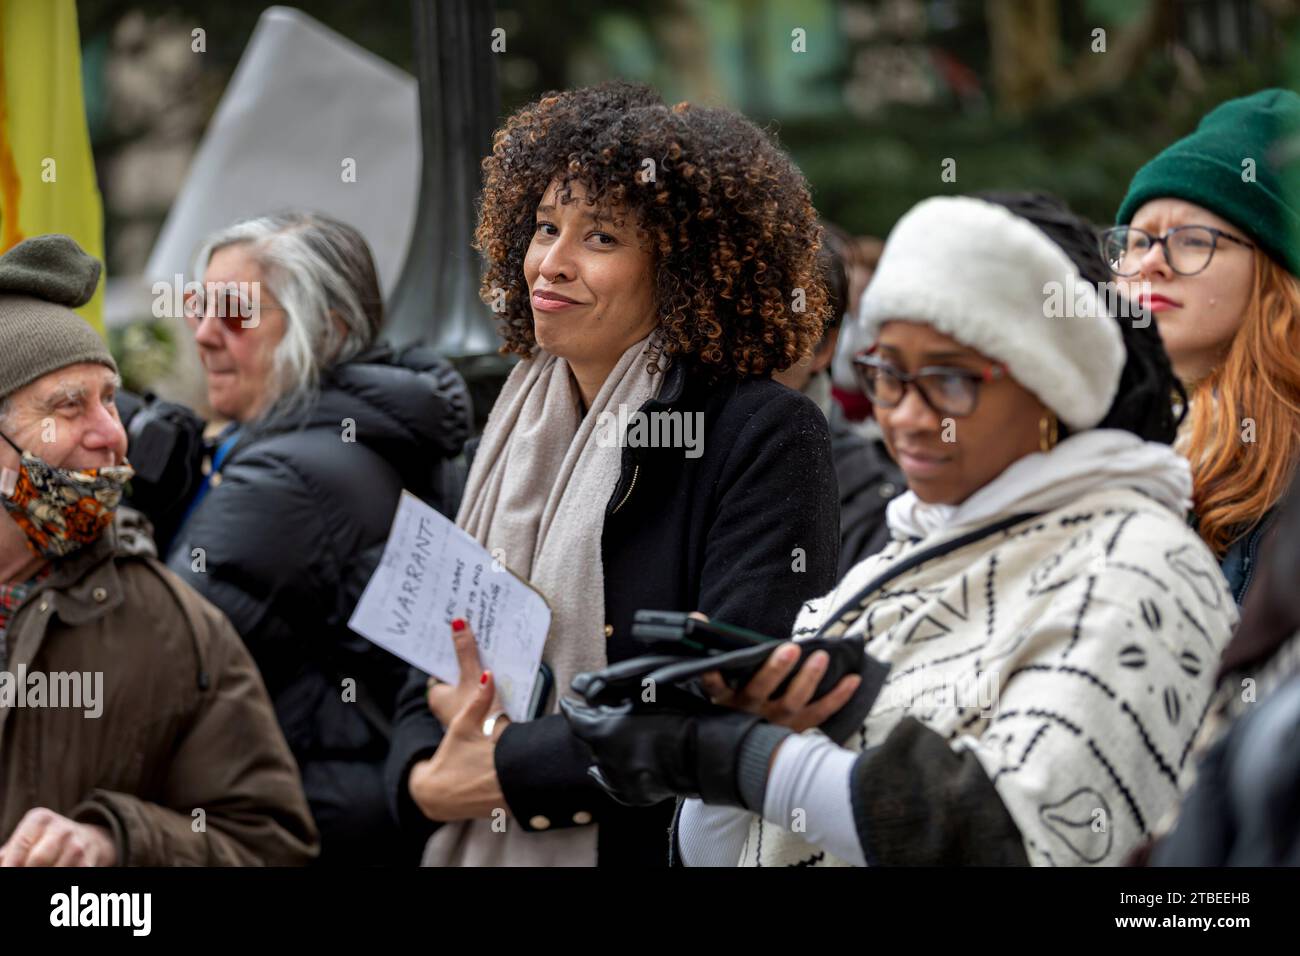 NEW YORK, NEW YORK - DECEMBER 6: NYC Council member and chairwoman of the Sanitation Committee, Sandy Nurse, joins dozens of city workers, community organizations, and activists at a rally in front of City Hall protesting Mayor Eric Adam's pending budget cuts that would slash service of at least four community composting programs on December 6, 2023 in New York City. If the cuts go forward, 198 out of 266 food-scrap drop-off sites, including those at the city's green markets, will close, and over 100 workers will lose their jobs. (Photo by Michael Nigro/Sipa USA) Stock Photo